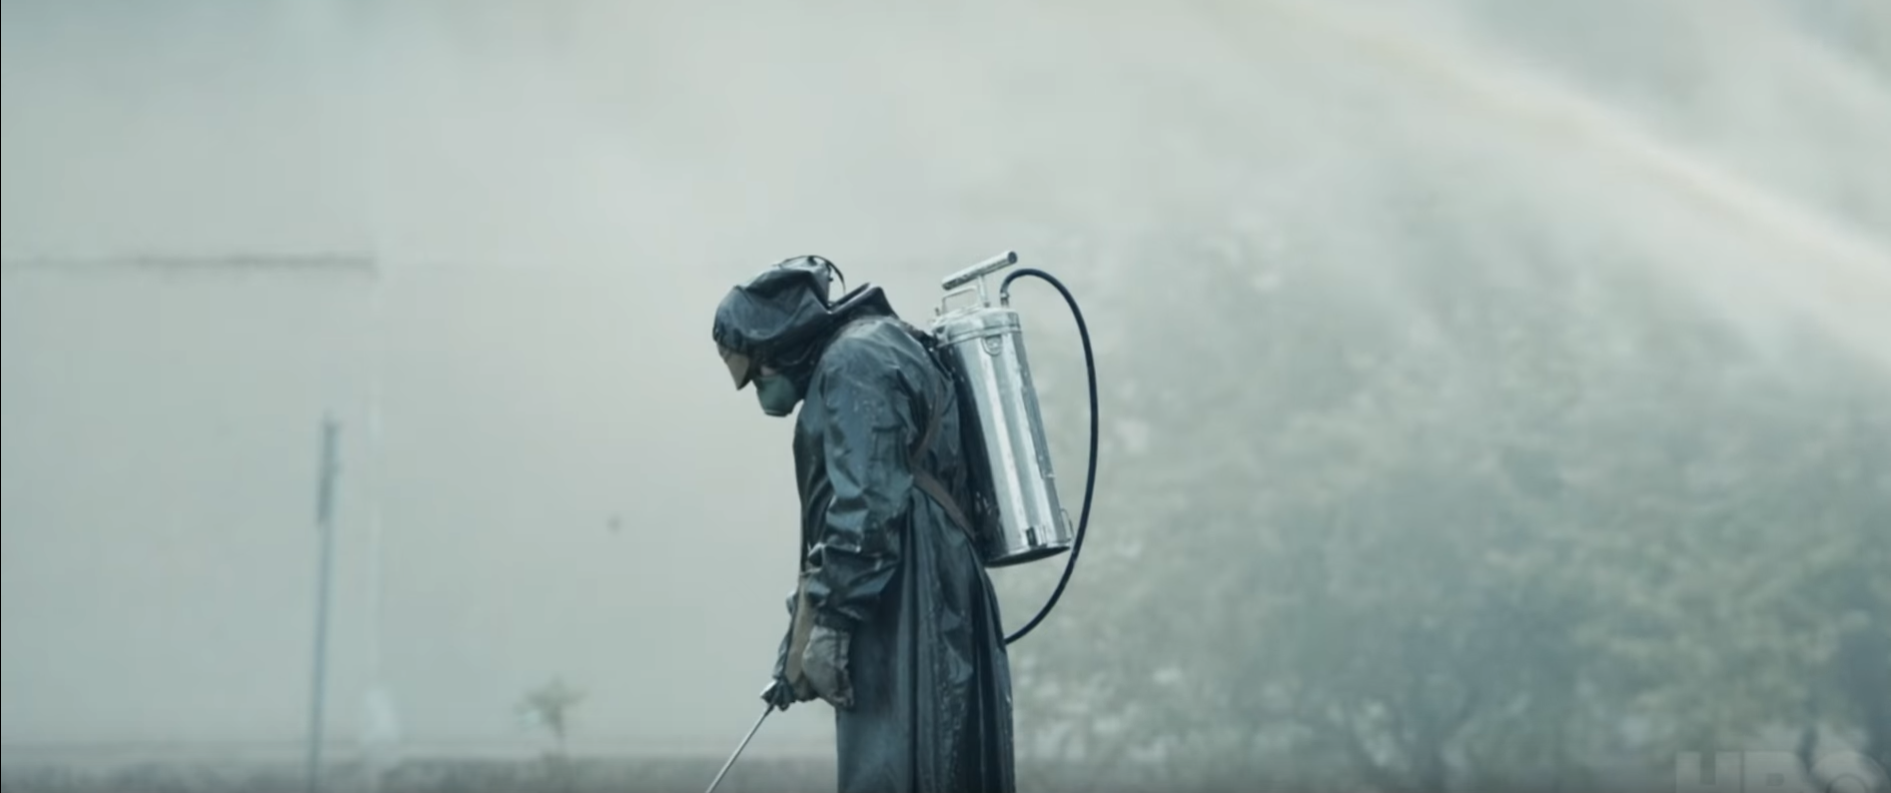 HBO's Chernobyl wins fans in Russia - Times of Oman